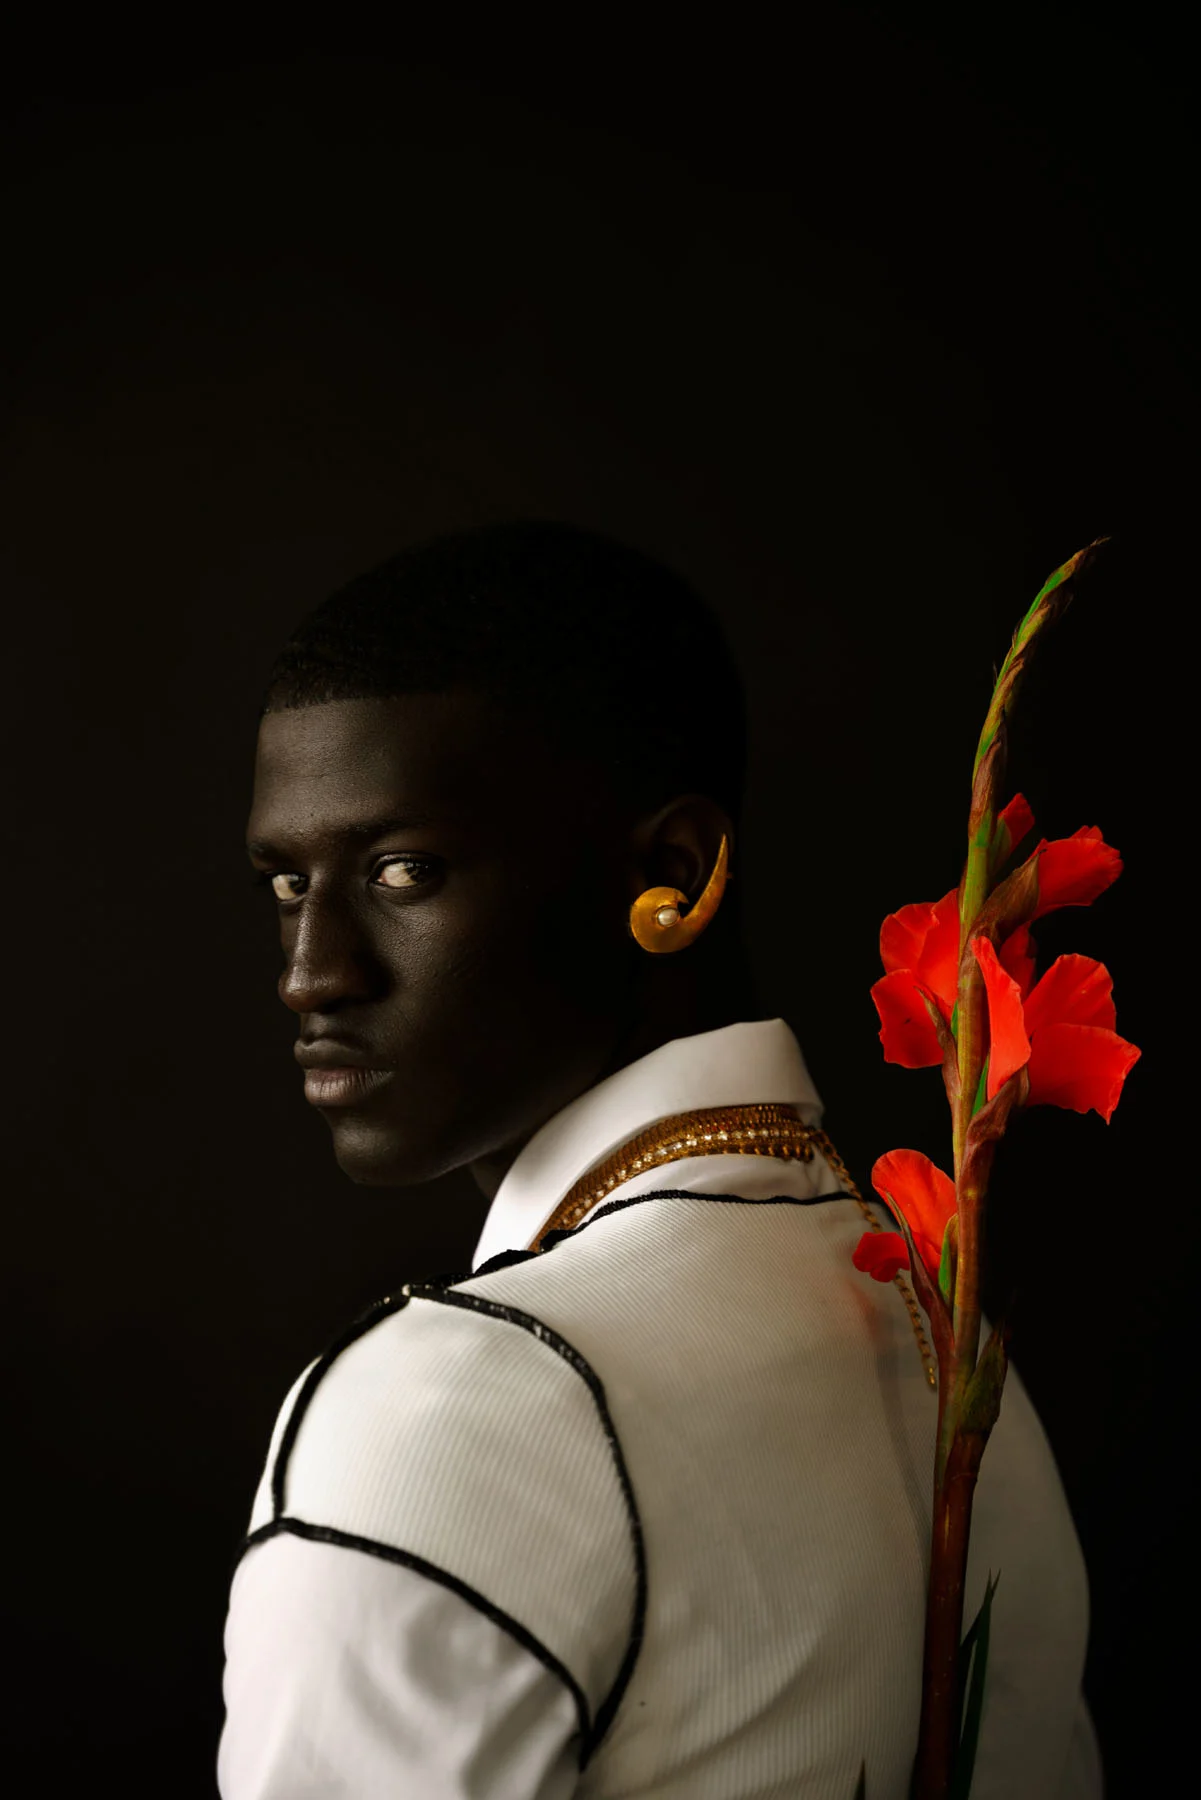 A low-lit photographic portrait of a male model wearing a collared white shirt and gold accessories, holding an orange flower in front of a black backdrop. He faces towards the camera as his body faces away from the camera.